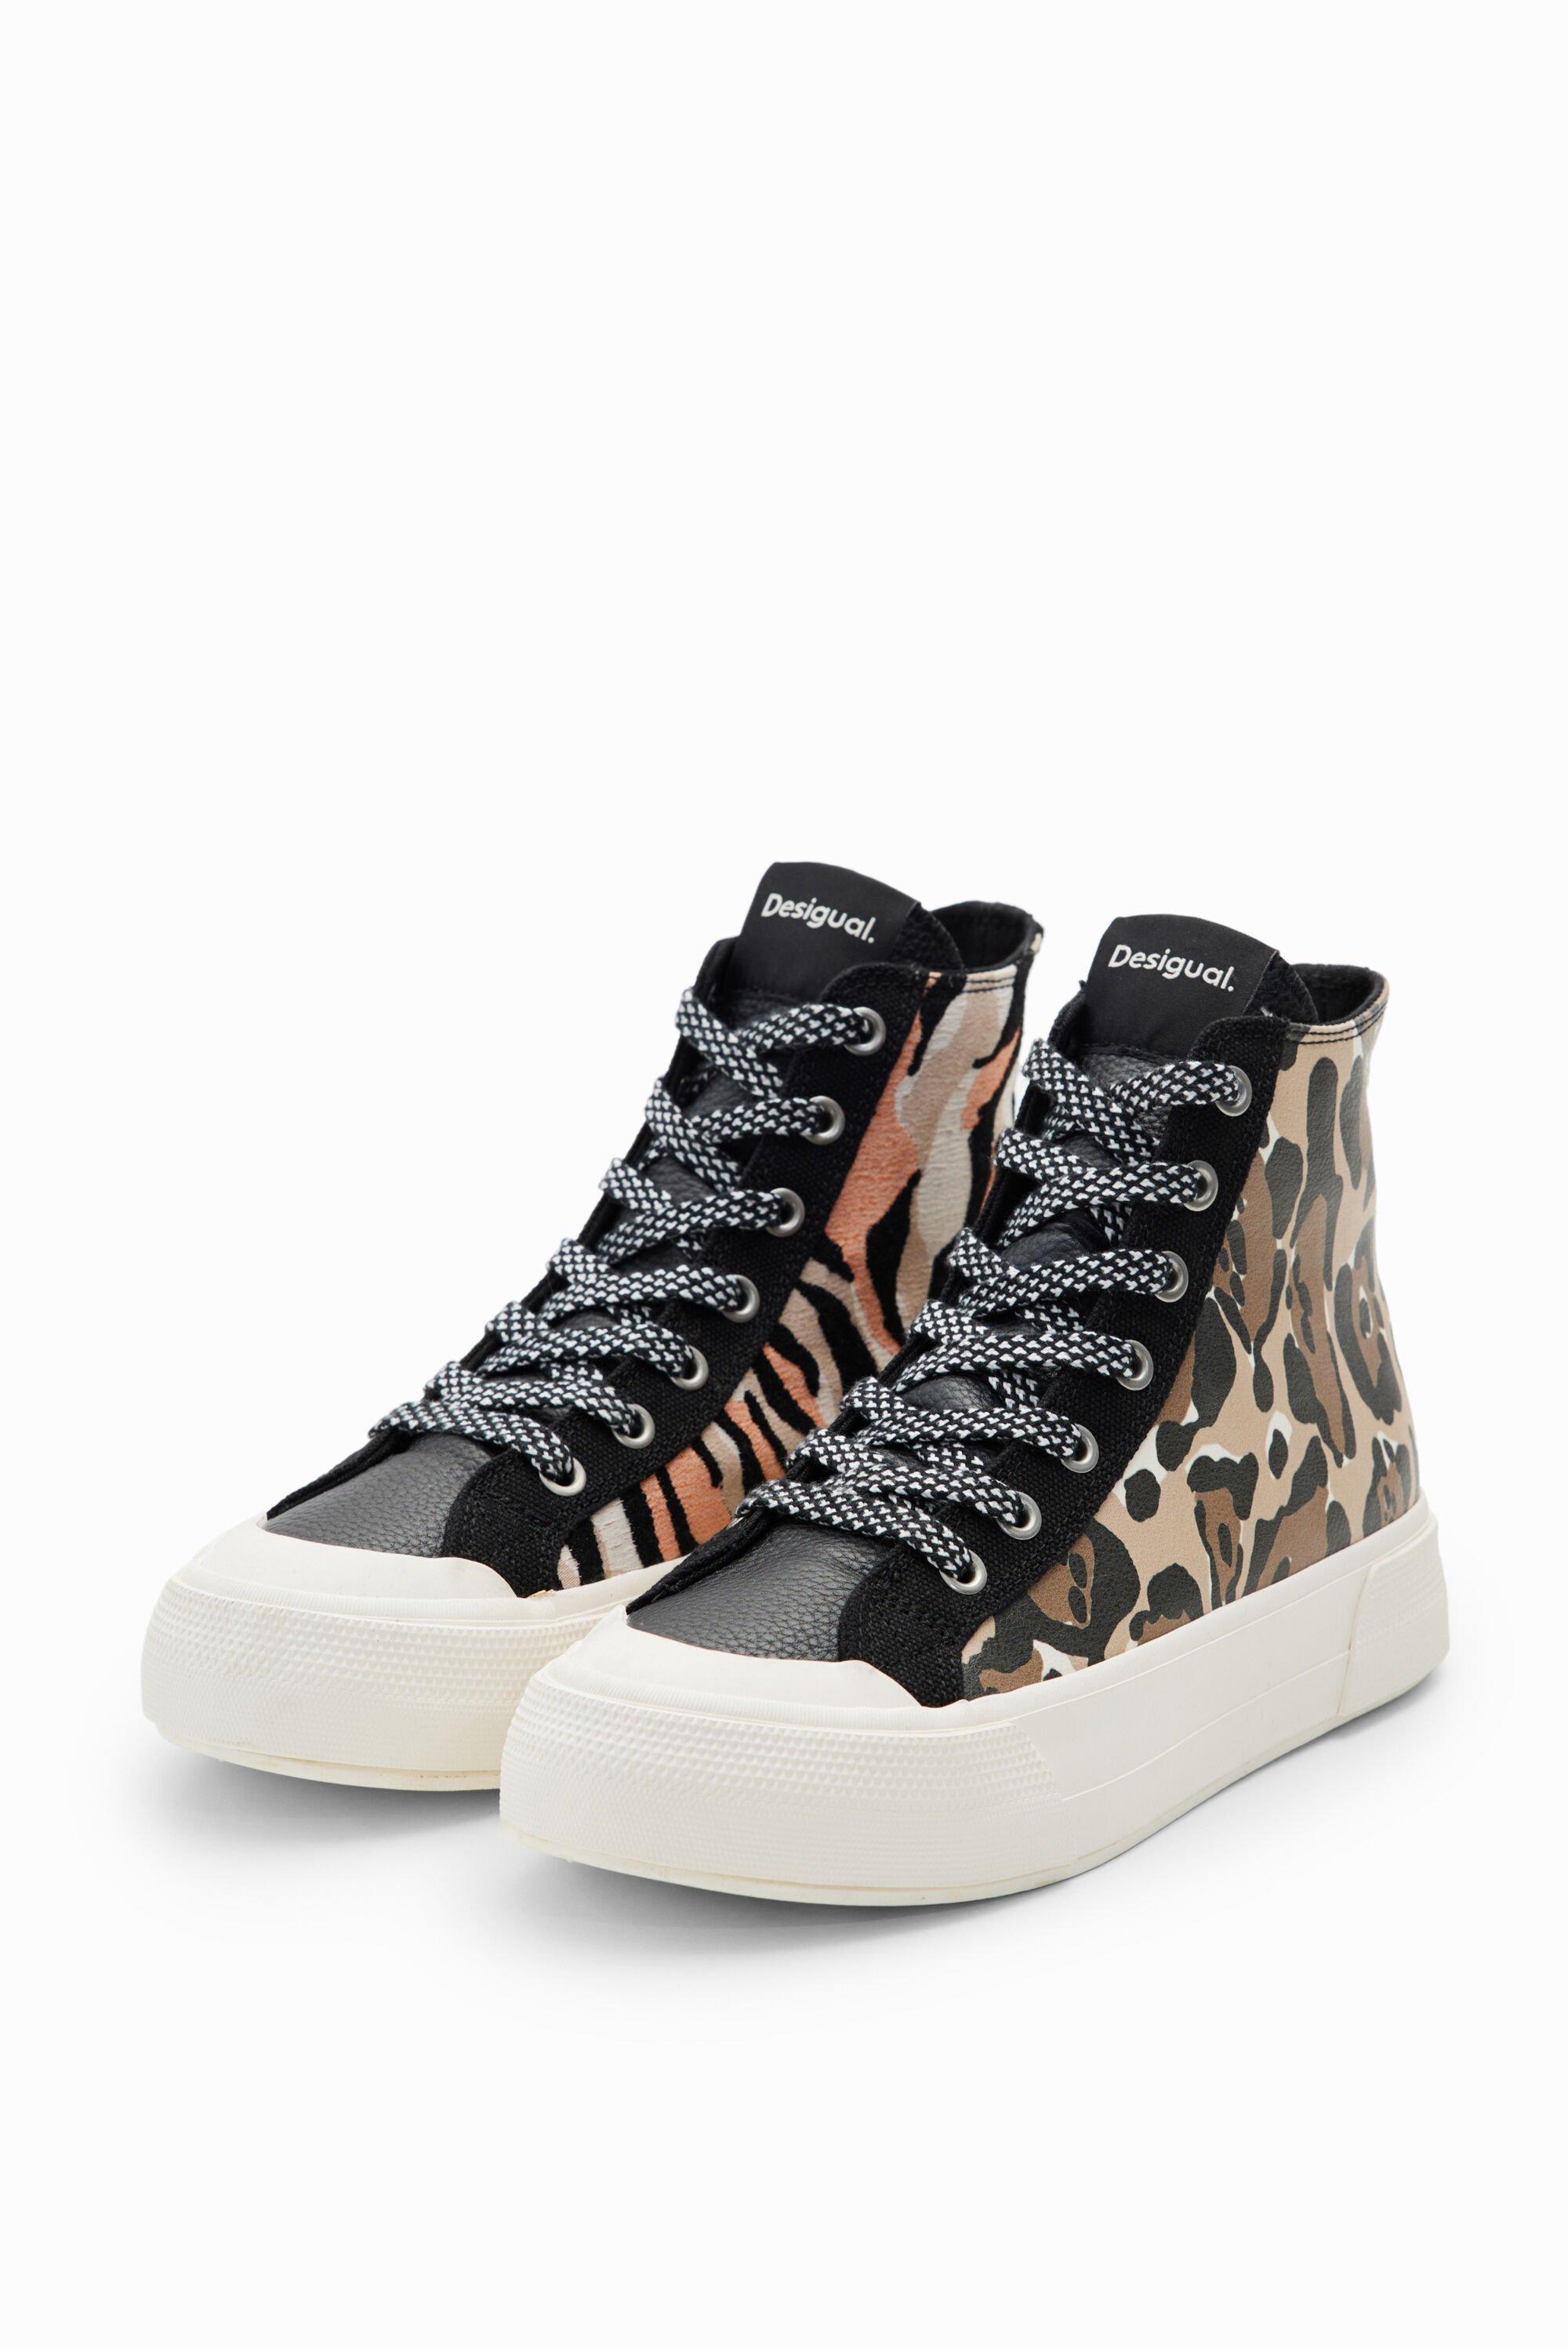 Desigual High-top Animal Print Sneakers in White | Lyst